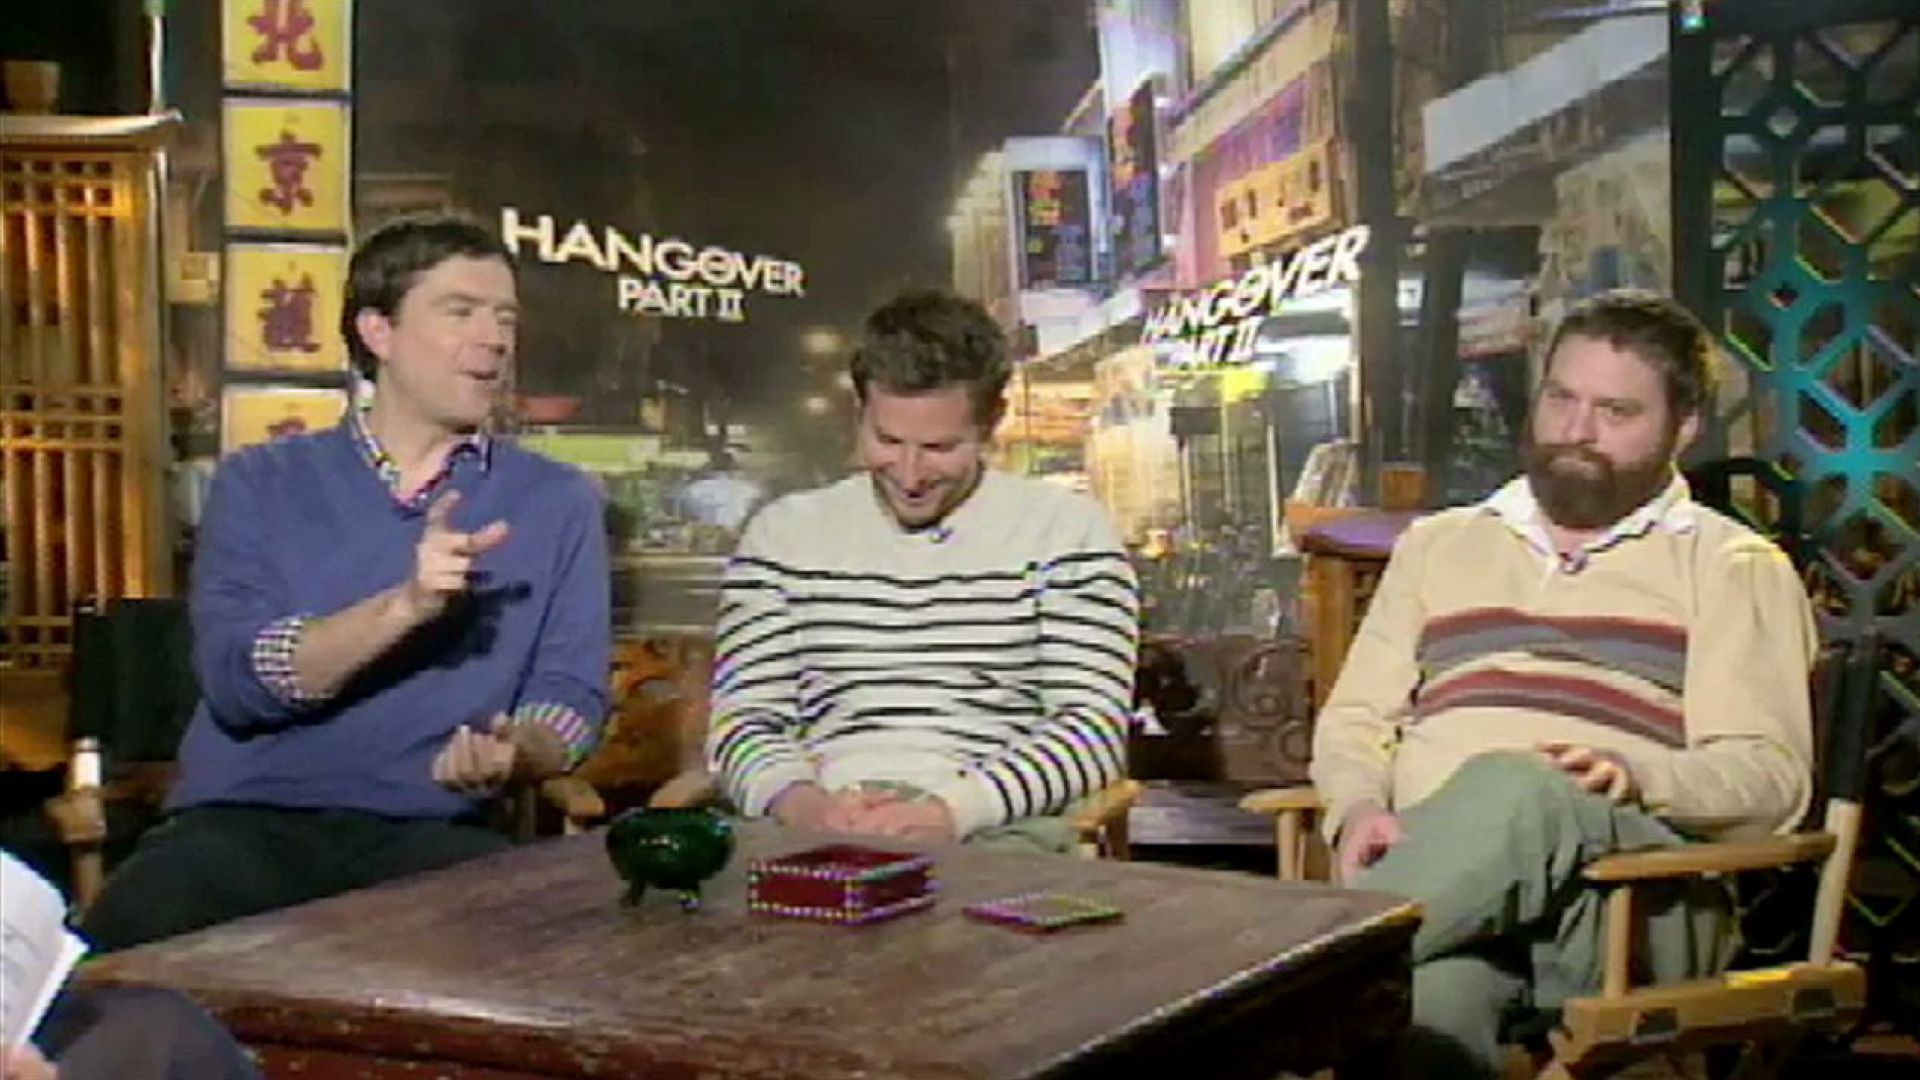 Bradley Cooper, Ed Helms and Zach Galifianakis talk about shooting The Hangover 2 in Bangkok